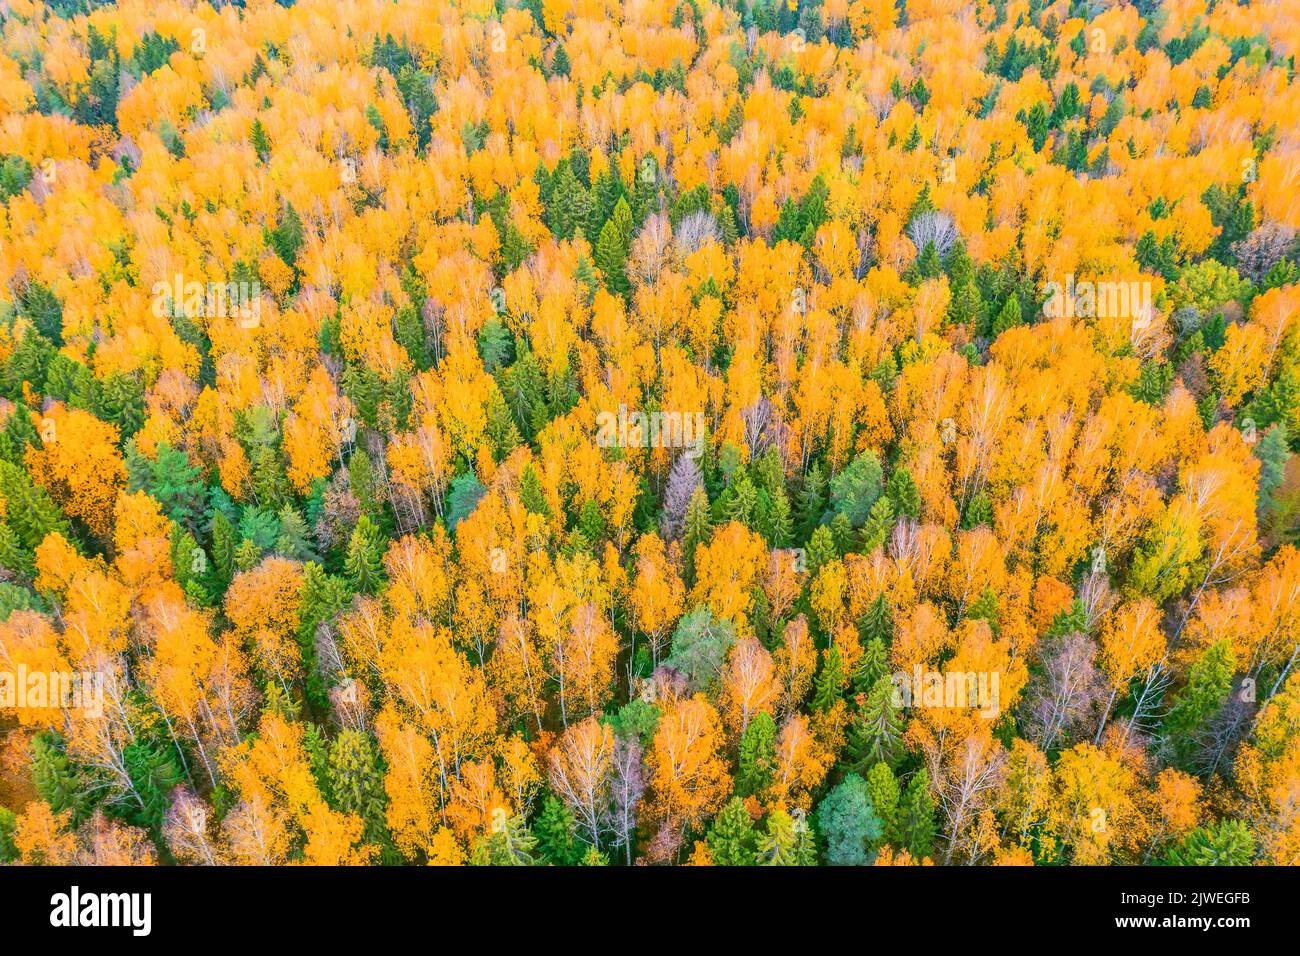 Aerial view of autumn spotted forest foliage with yellow roses and coniferous trees Stock Photo